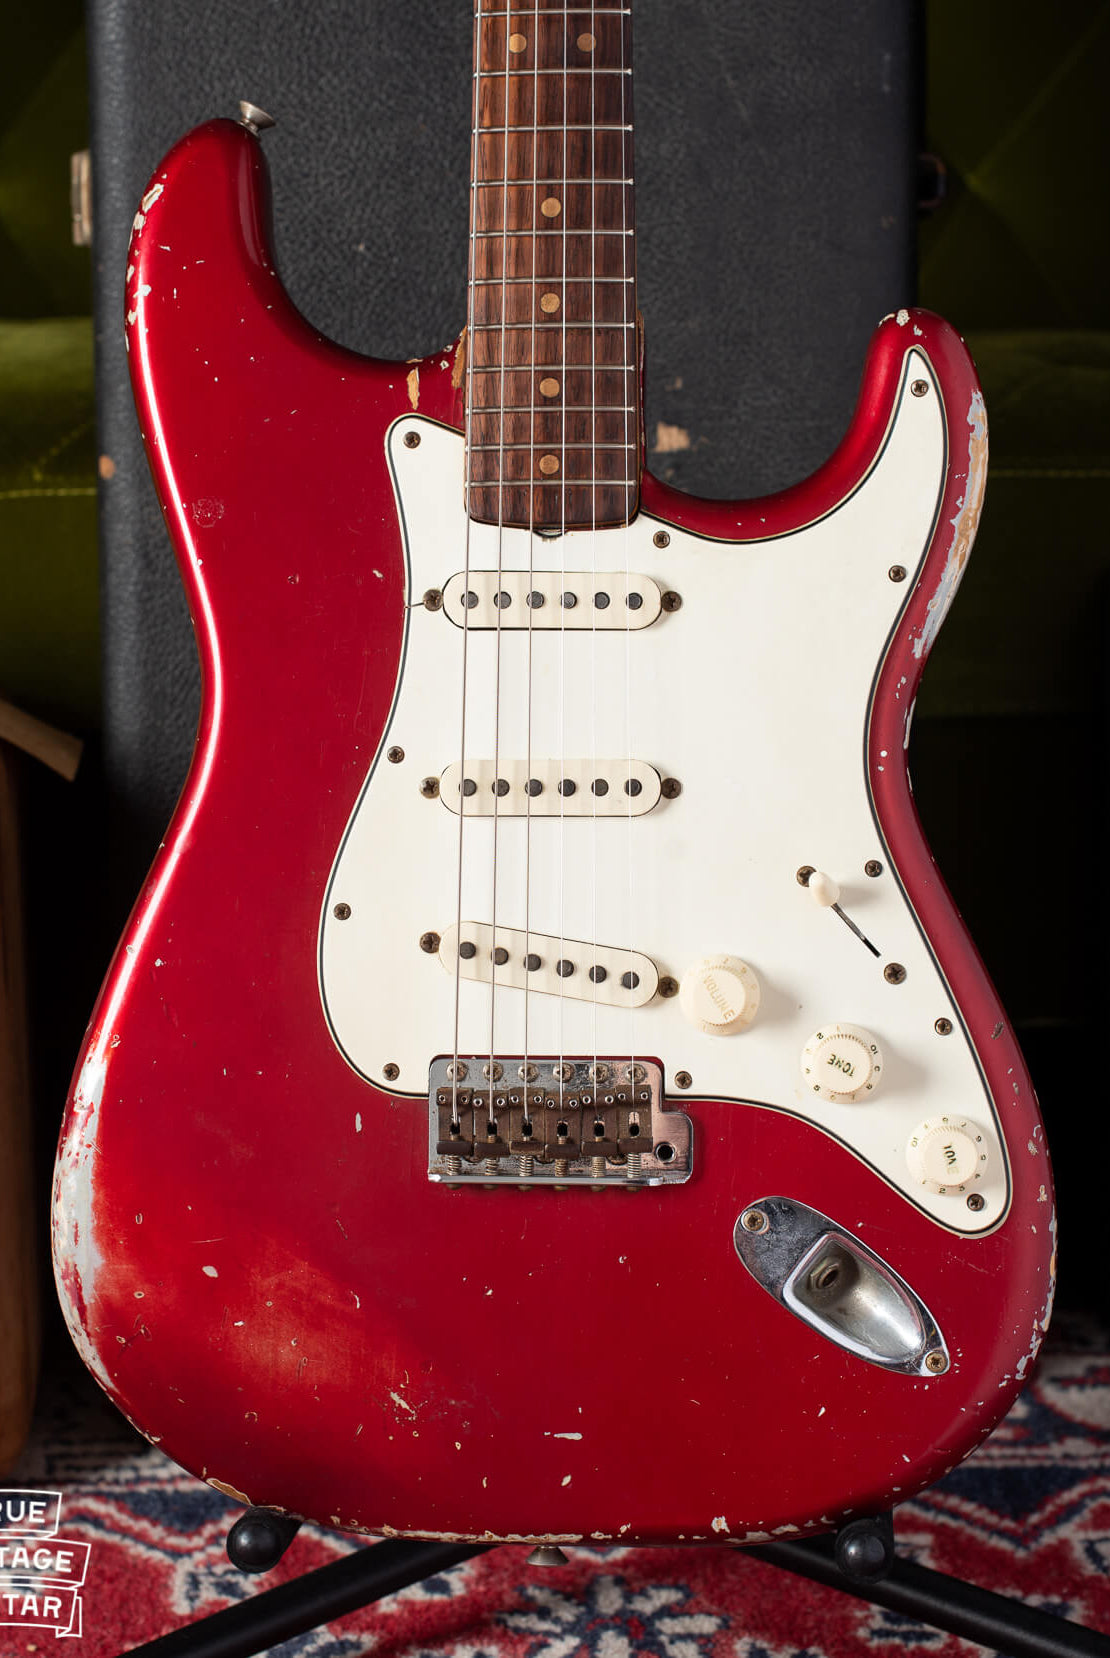 Fender Stratocaster 1964 Candy Apple Red, how to date, Stratocaster values